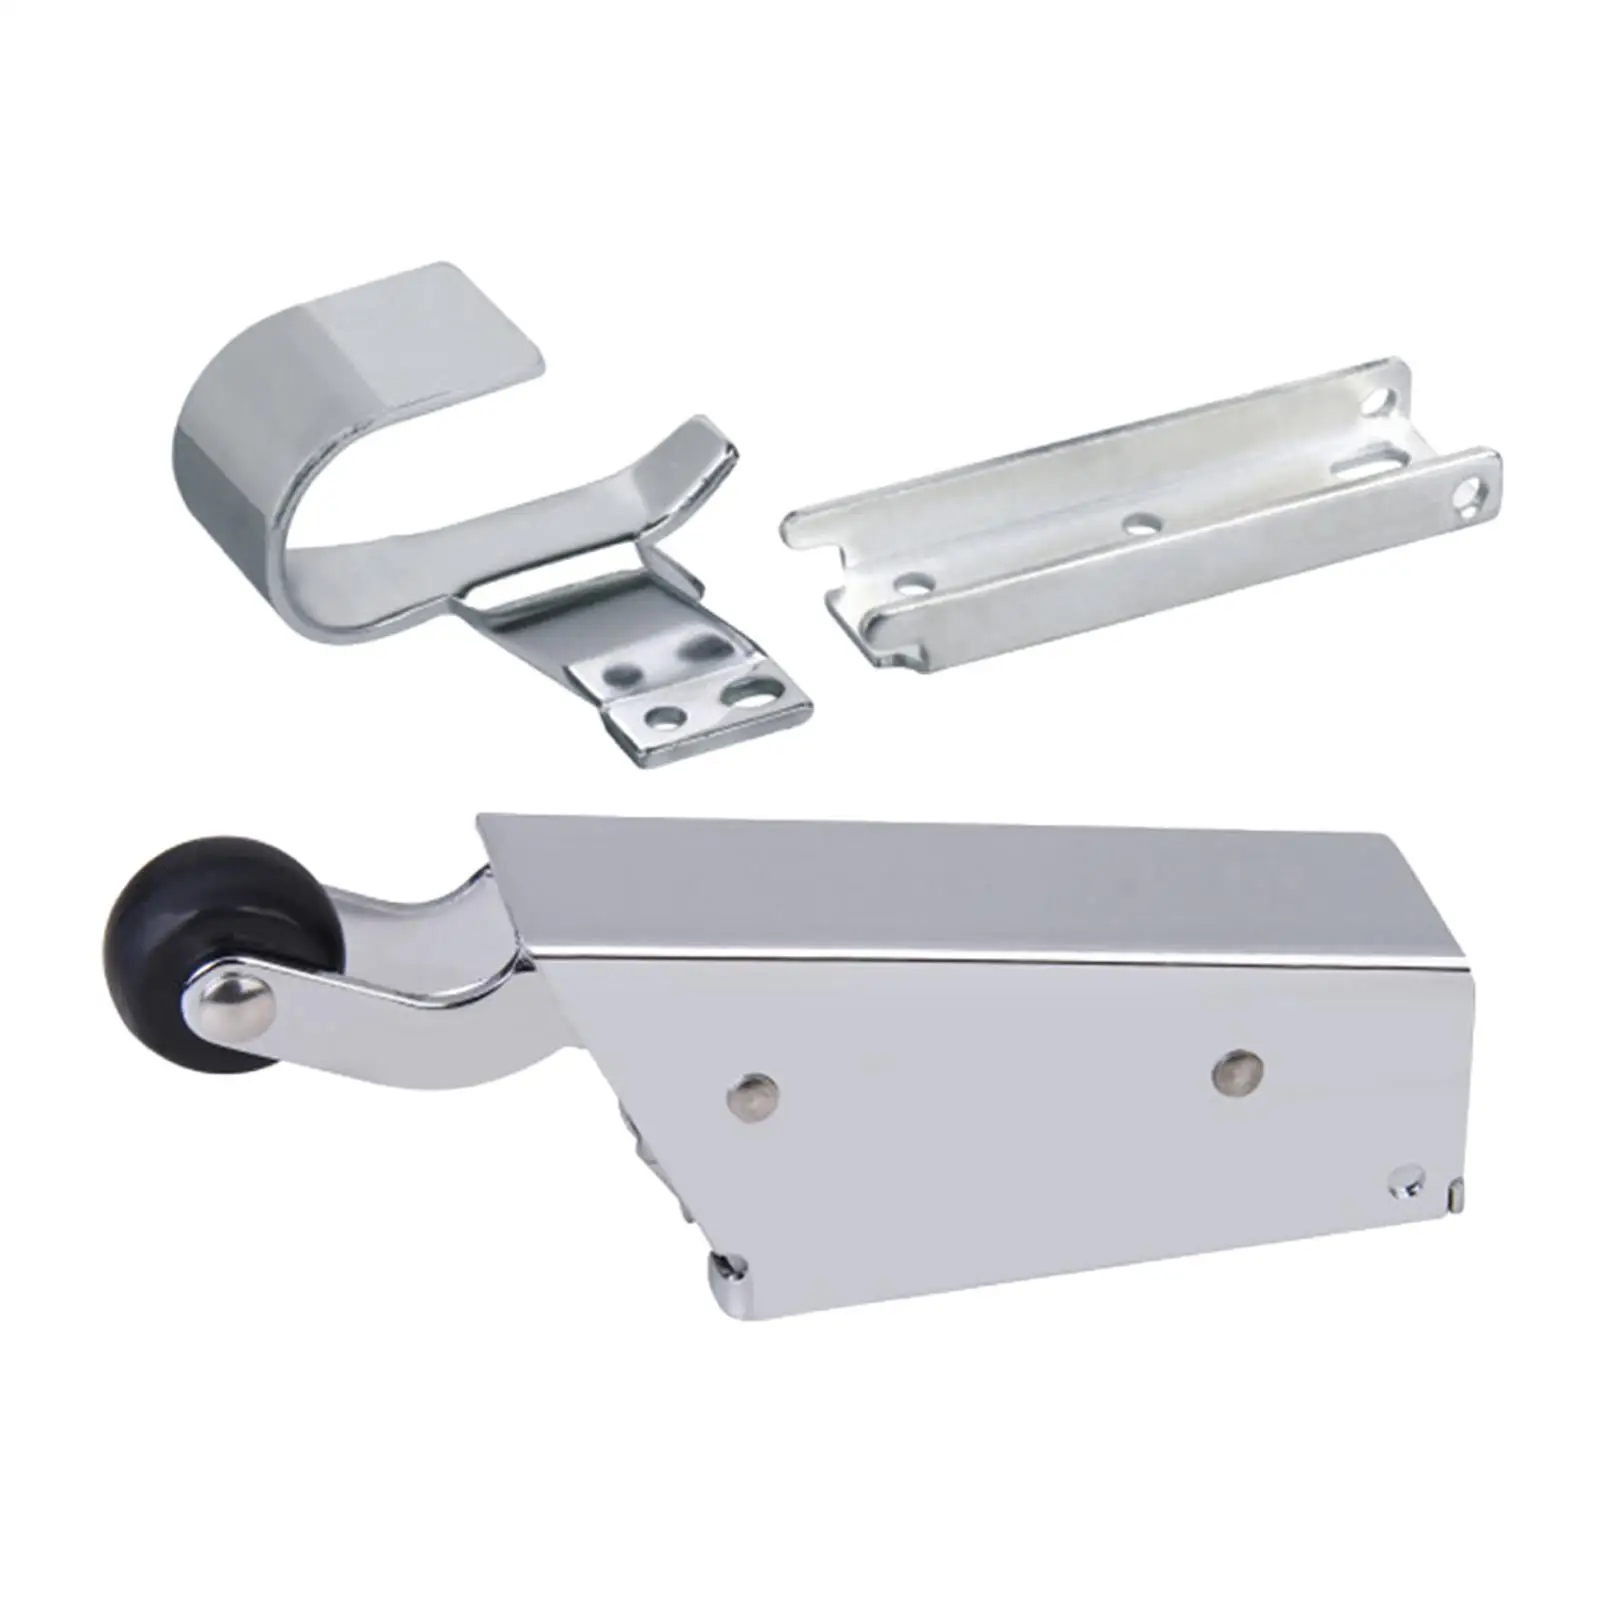 Spring Action Doors Closer Spring Loaded Steel Home Improvement with Quiet Rubber Wheel